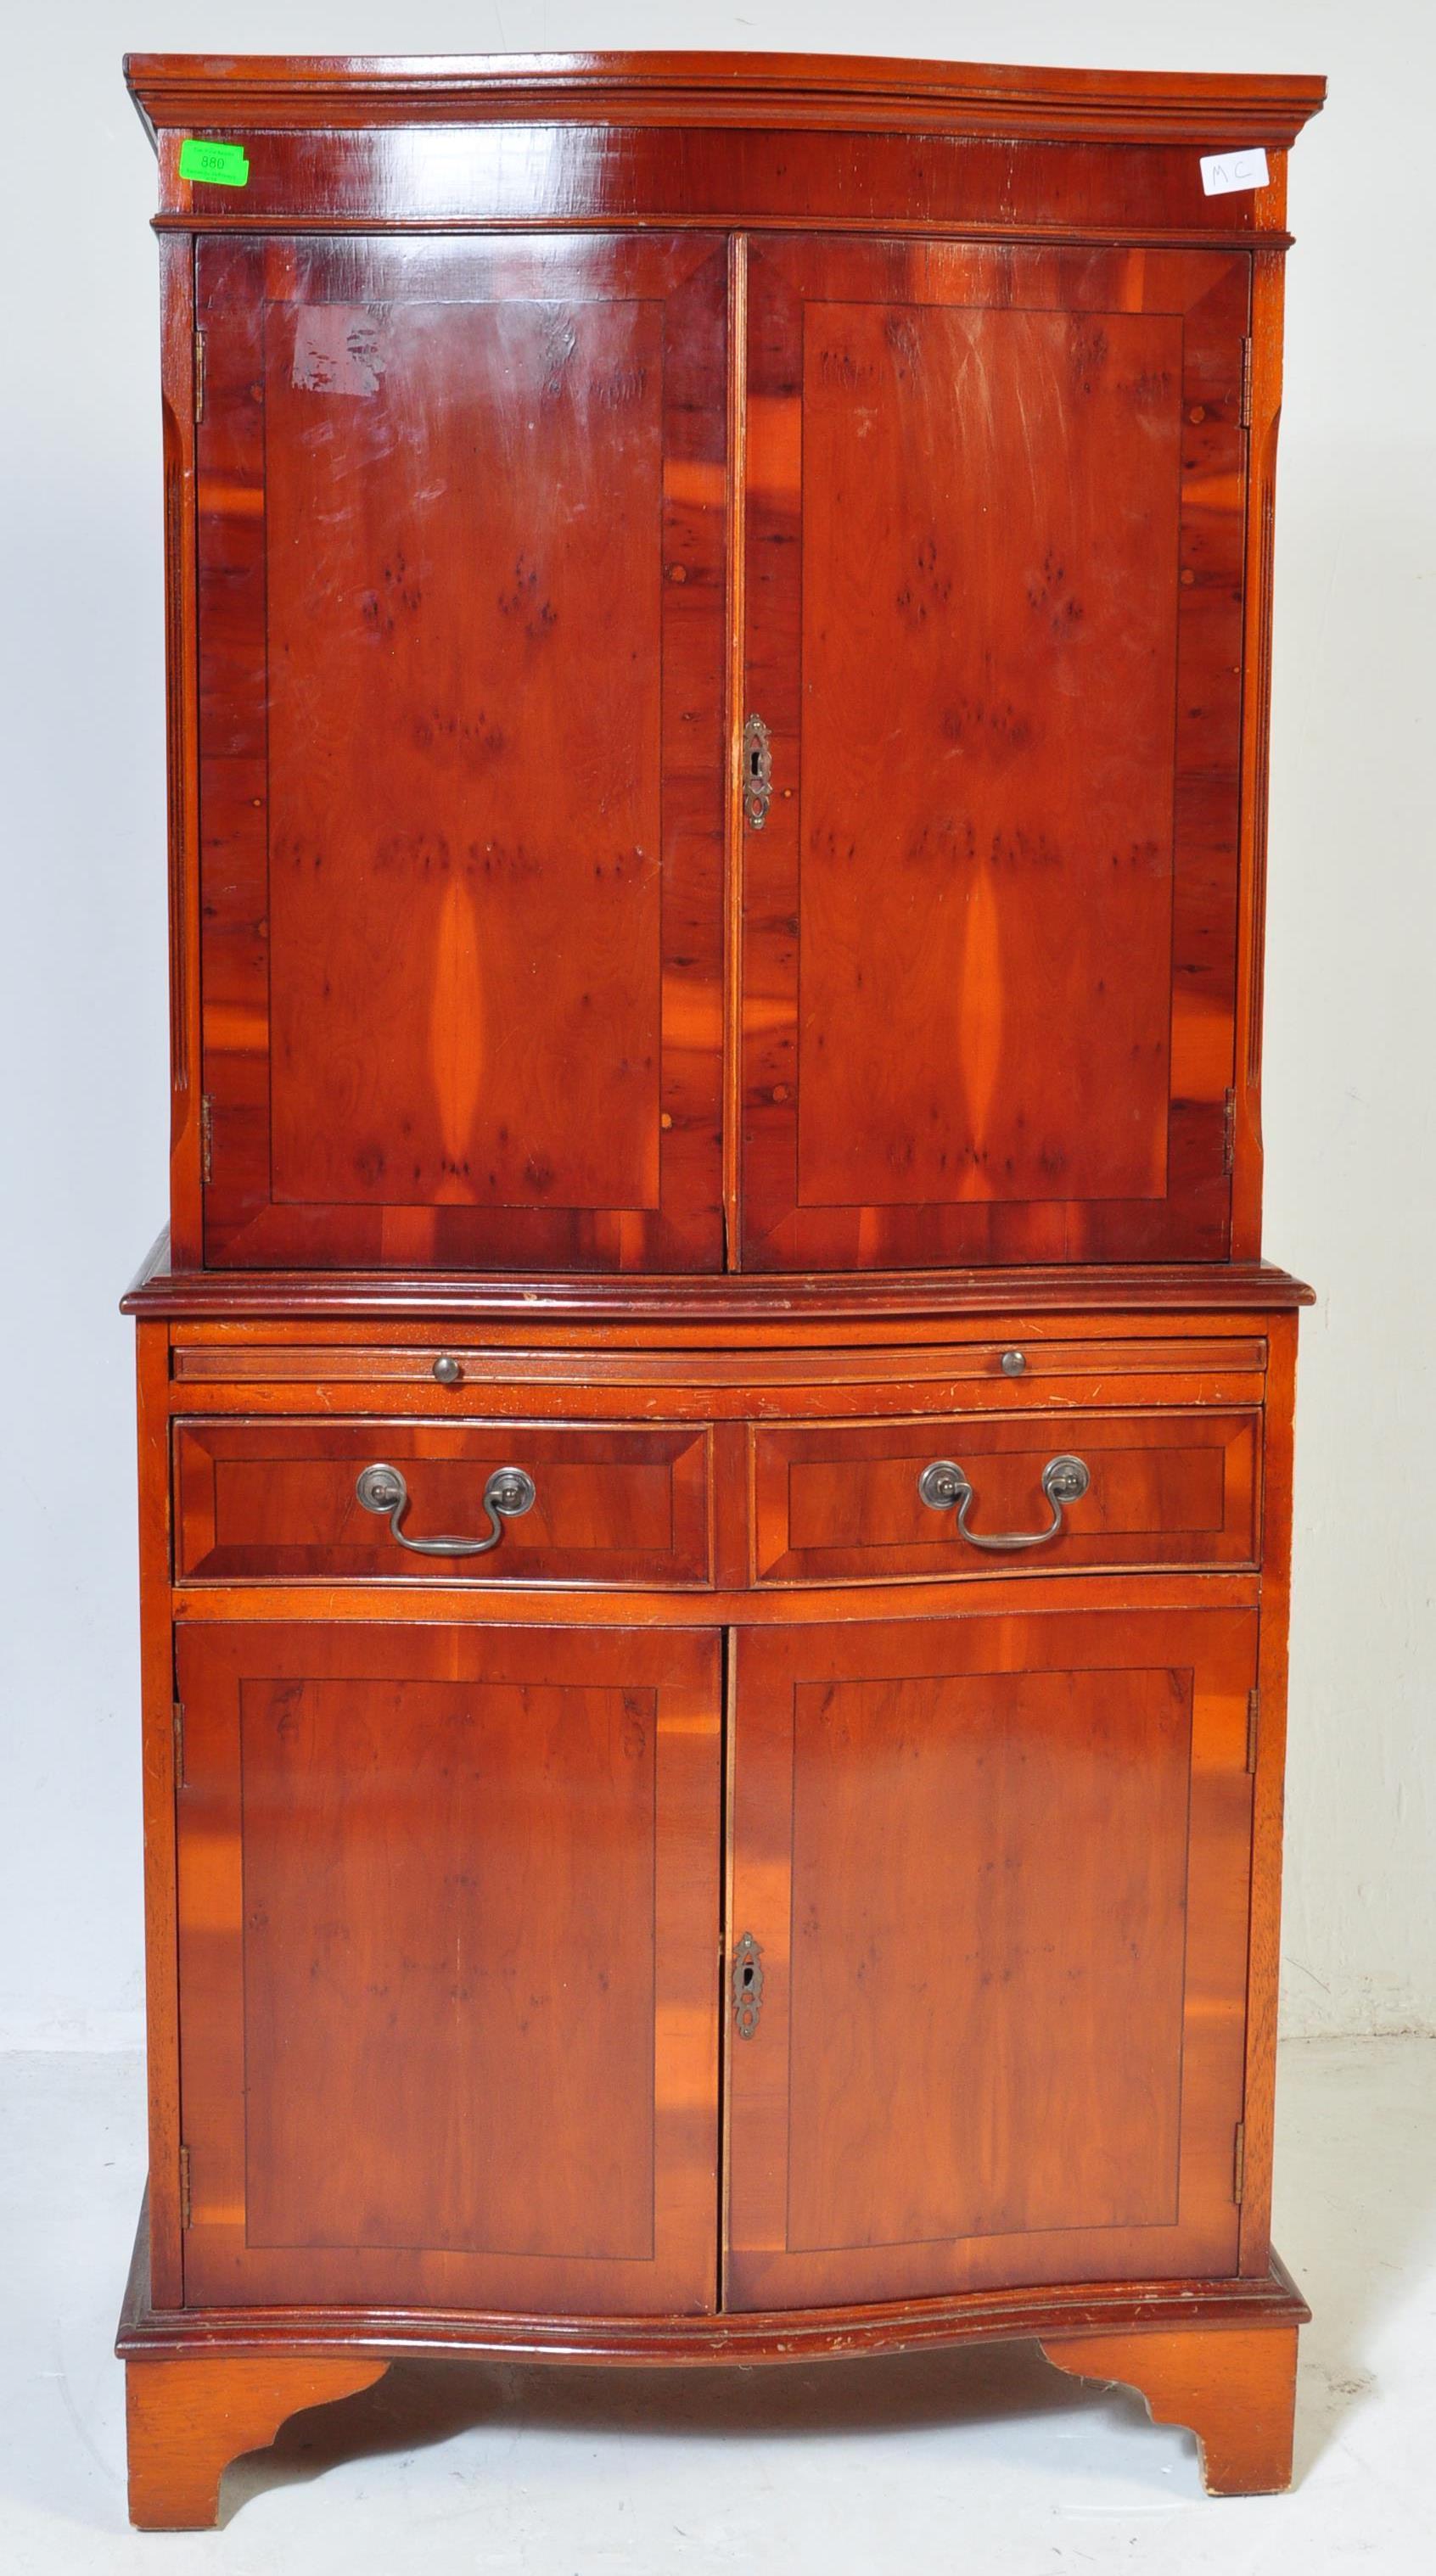 20TH CENTURY YEW AND MAHOGANY VENEER COCKTAIL CABINET - Image 3 of 5